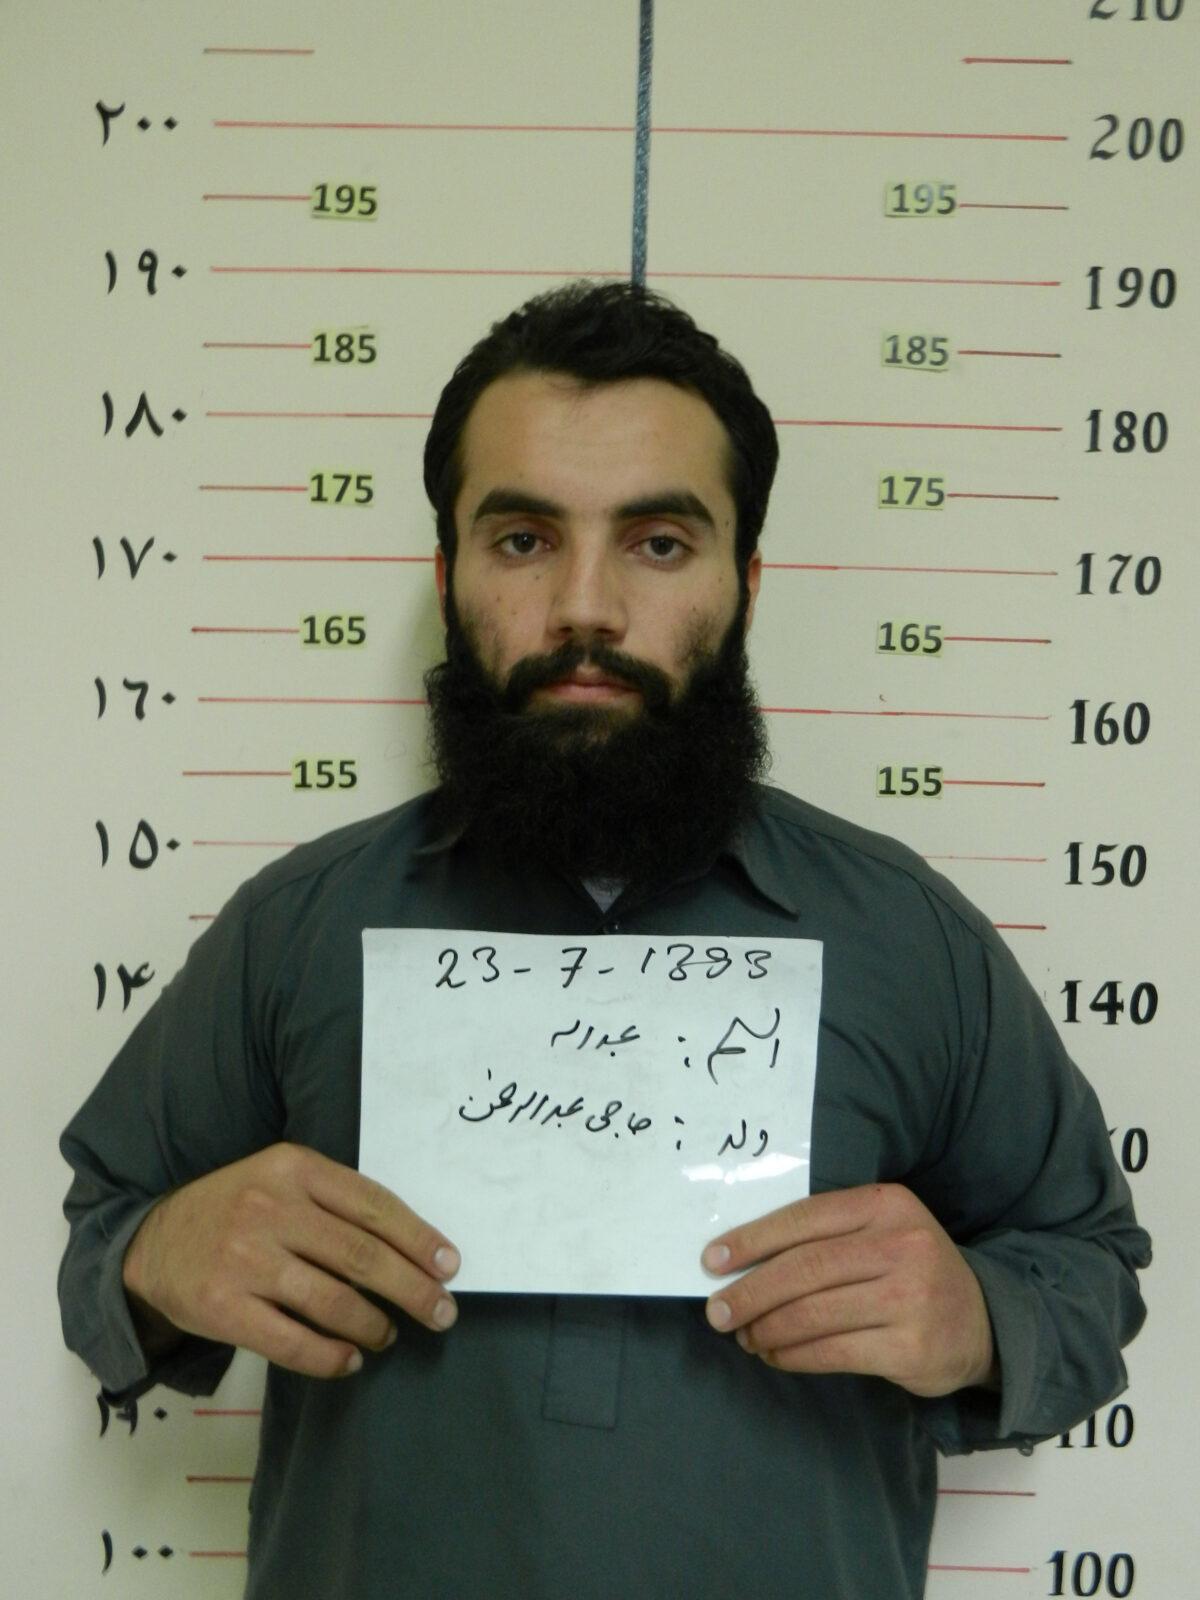 Anas Haqqani, a senior leader of the Haqqani network, arrested by the Afghan Intelligence Service, in a 2014 file photograph. (National Directorate of Security Department/Handout/Reuters)